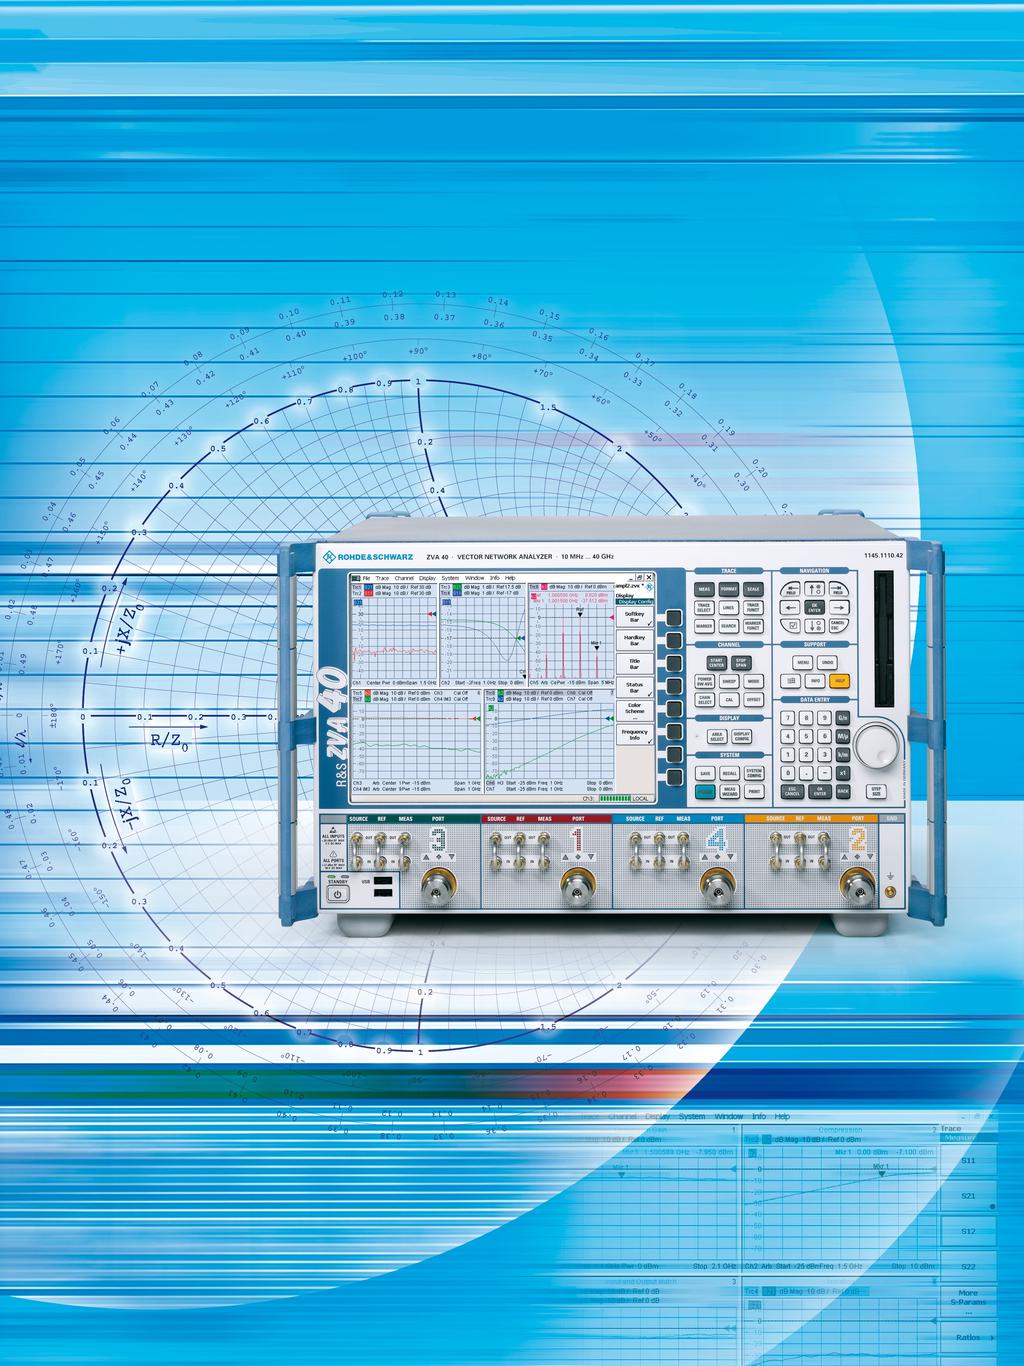 GENERAL PURPOSE 44 448 The high-end network analyzers from Rohde & Schwarz now include an option for pulse profile